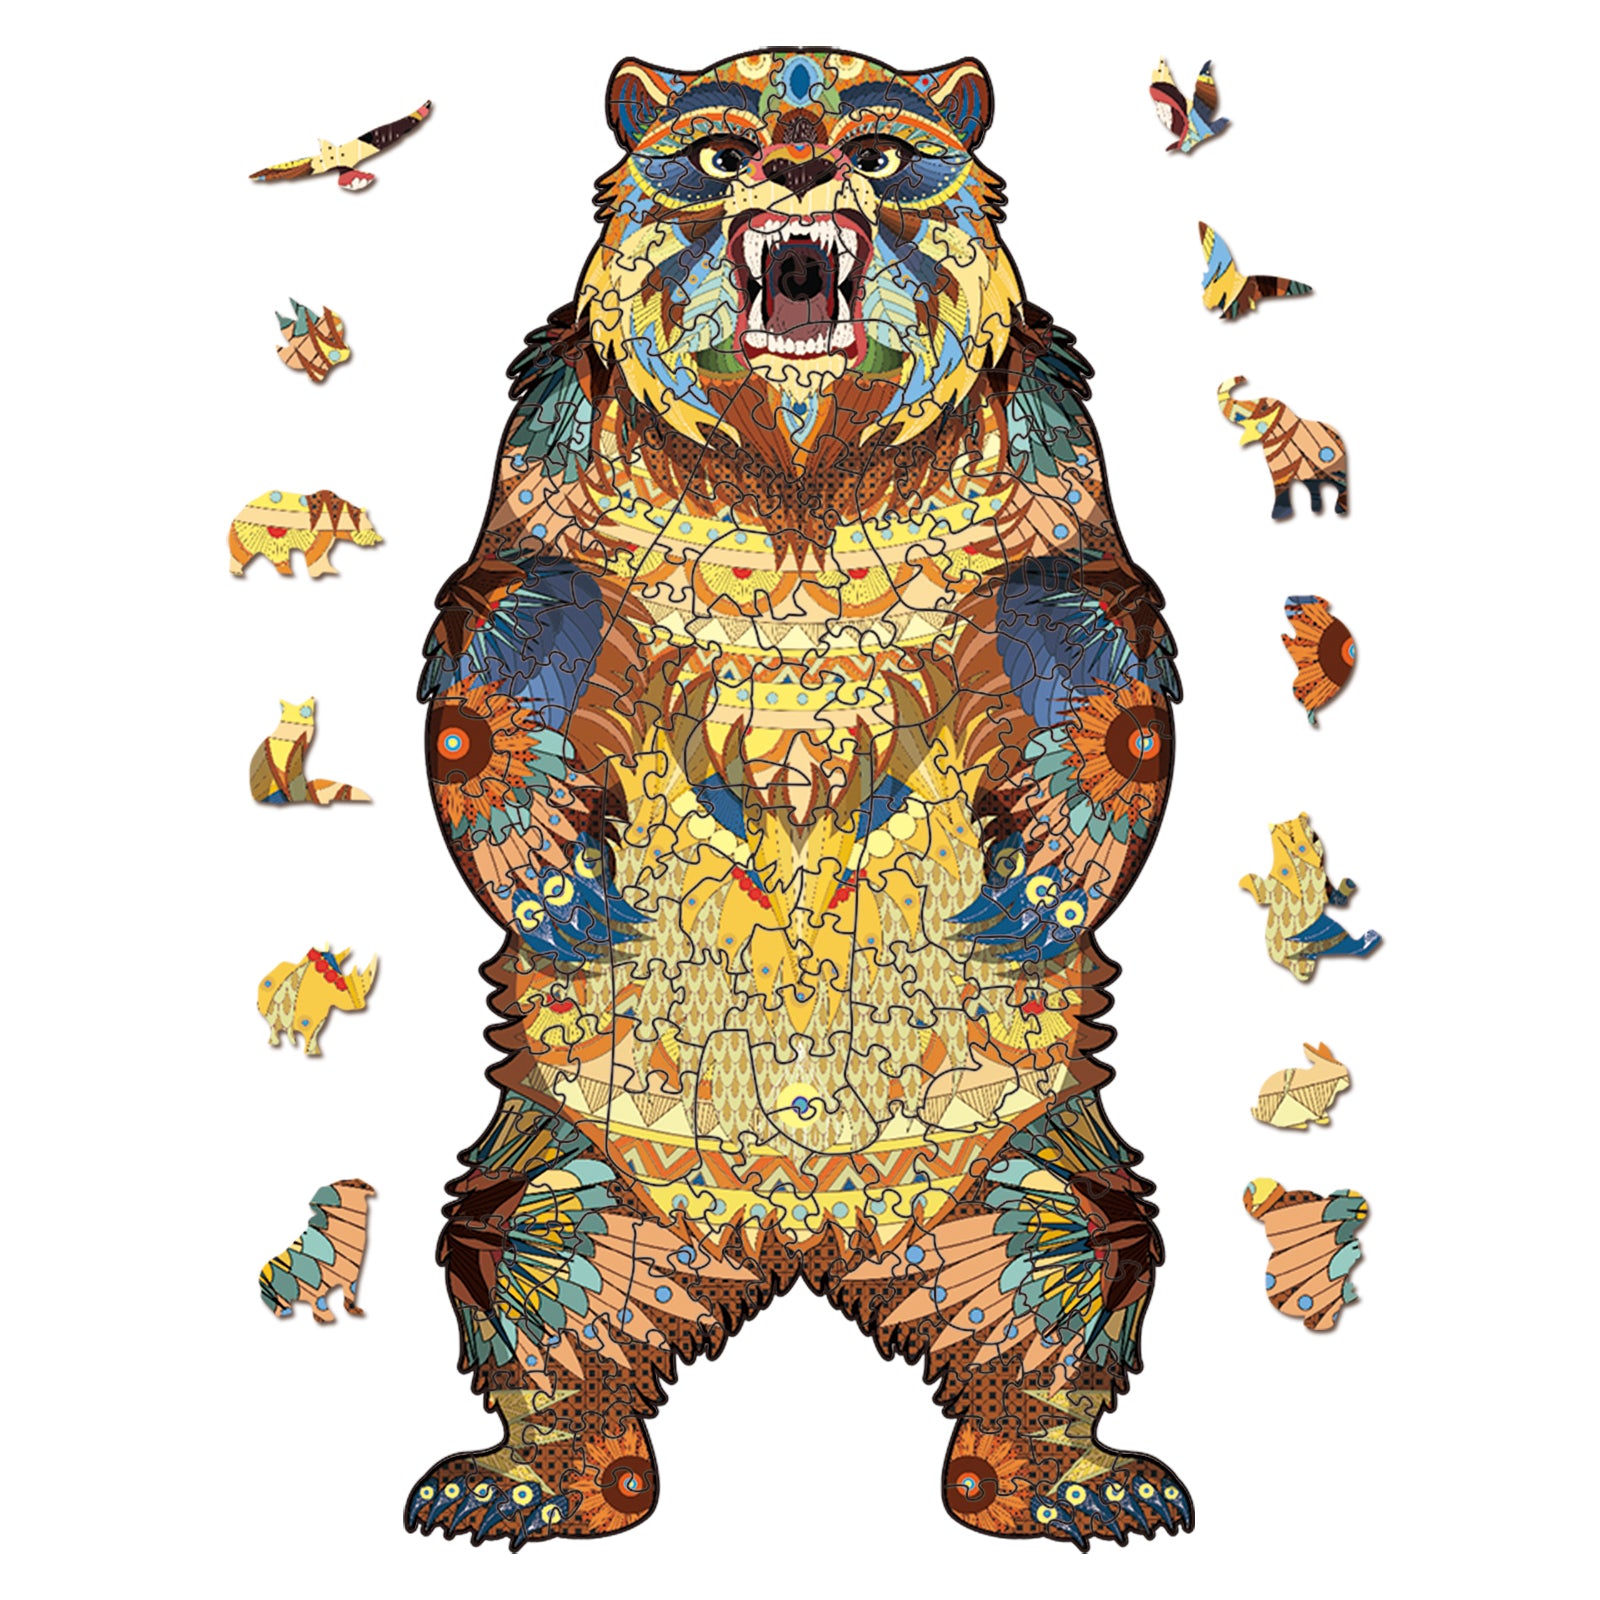 Wild Bear Jigsaw Puzzles - Unique Shaped Wooden Puzzles